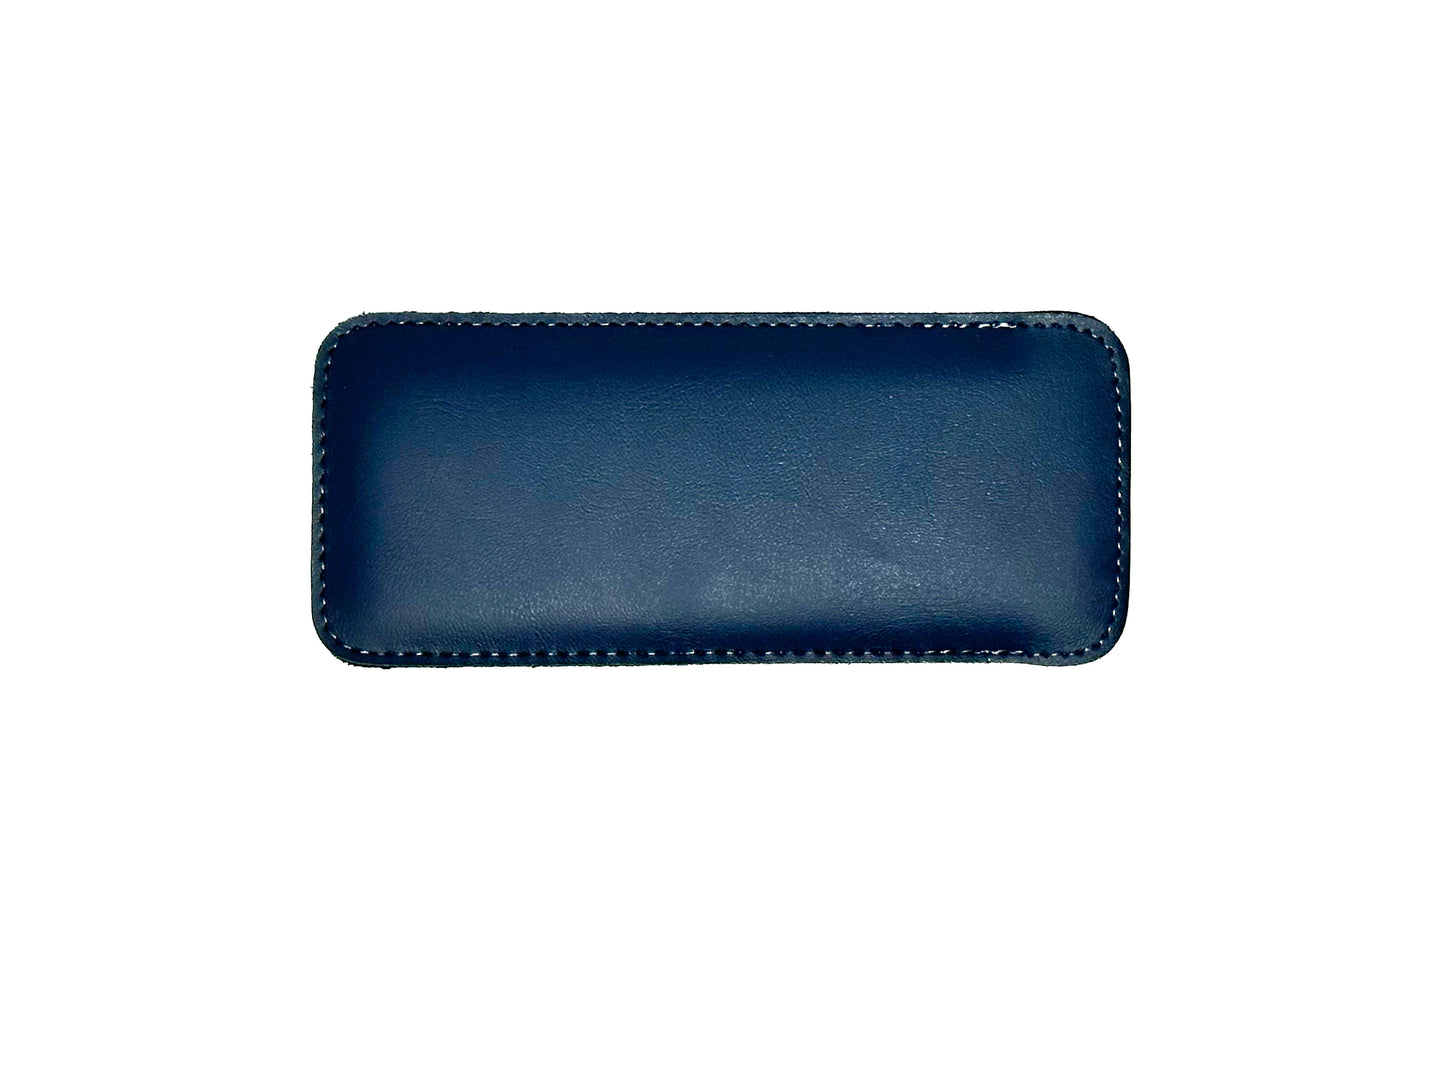 Thin, compact leather slip-in case in Navy.